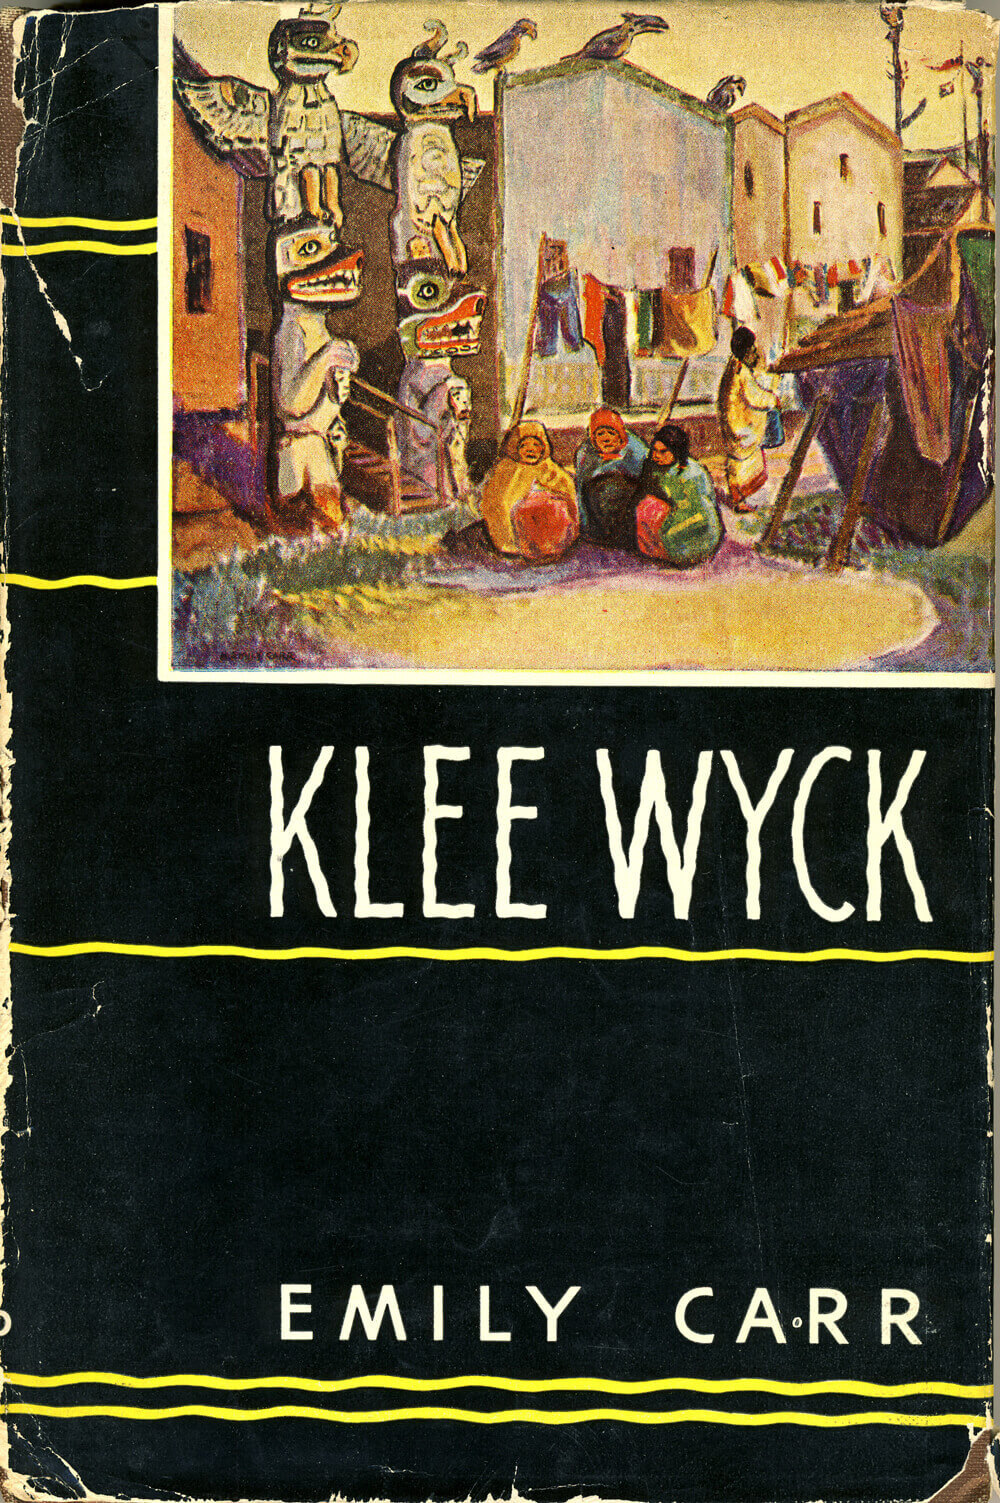 Art Canada Institute, Emily Carr, First edition of Carr’s autobiographical work Klee Wyck, 1941